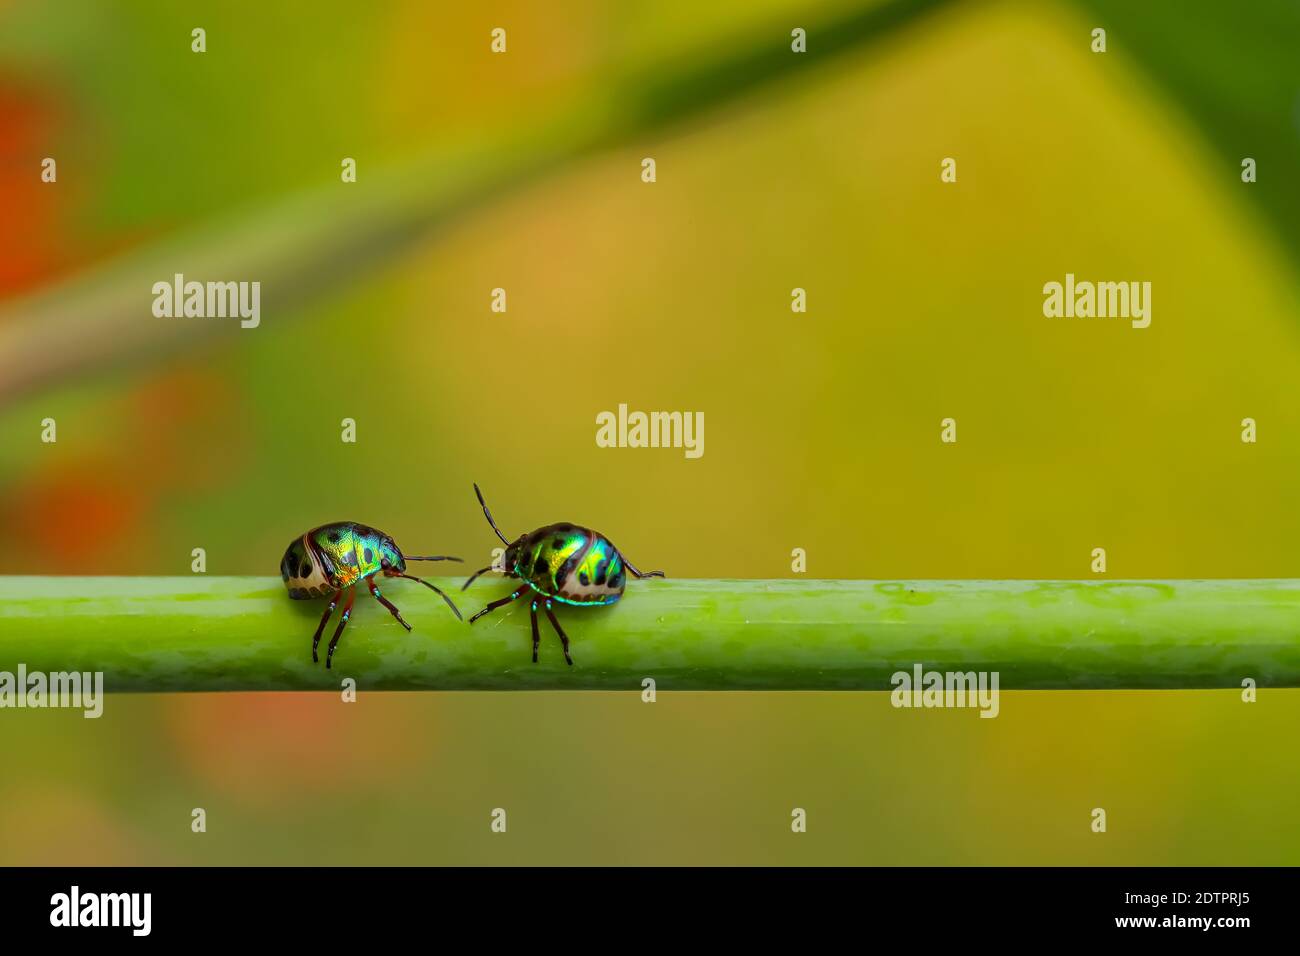 Macro image of two jewel bugs with vibrant colors walking on a stem with blur green background Stock Photo